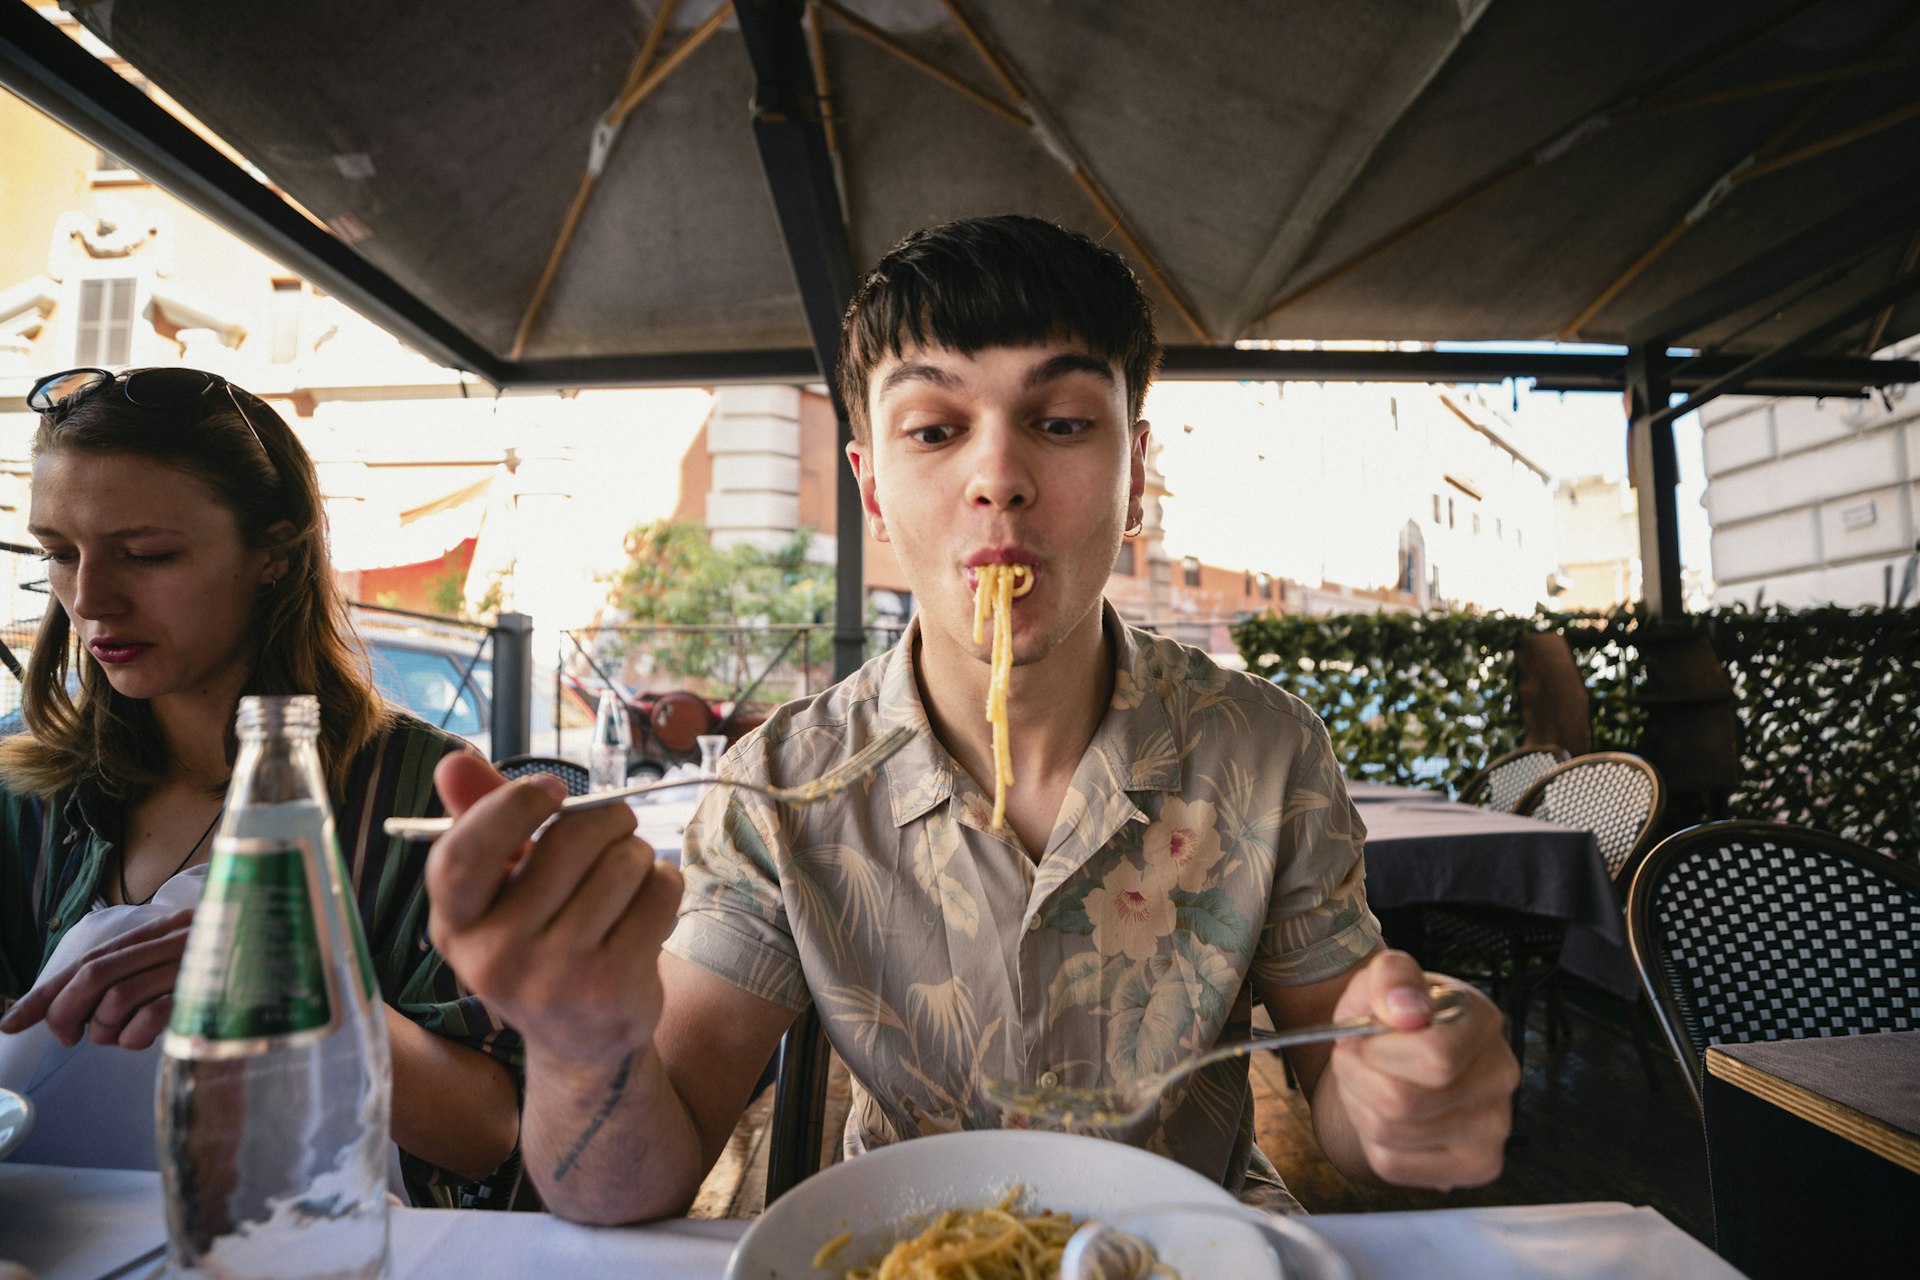 A front-view shot of a young man enjoying a delicious meal of spaghetti in Italy, he is wearing casual clothing